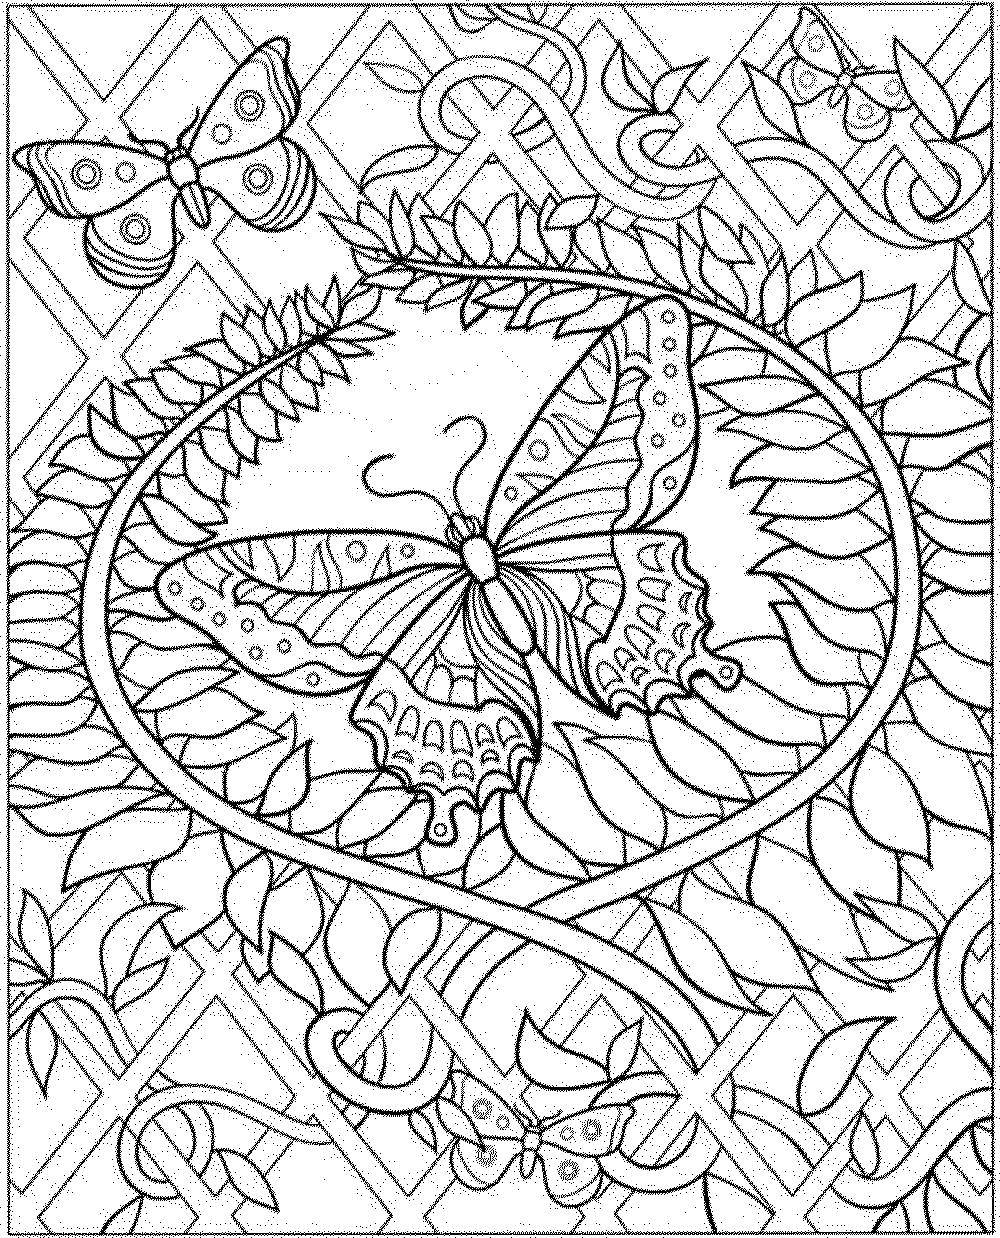 Coloring The butterfly garden. Category butterflies. Tags:  Butterfly.